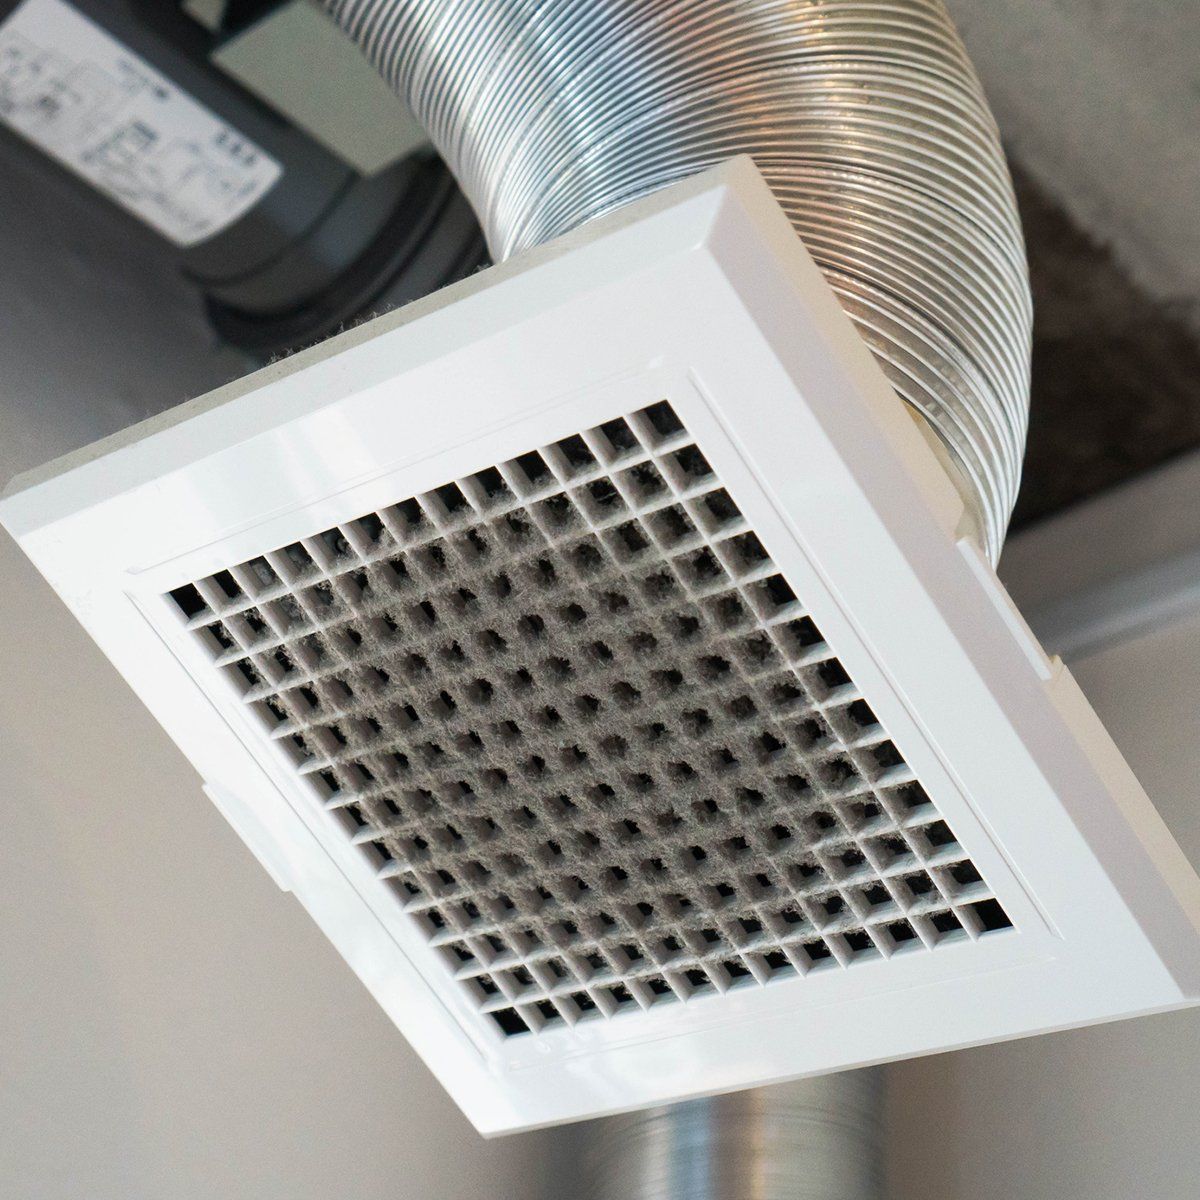 A vent in Key West, FL, that needs air conditioner vent cleaning